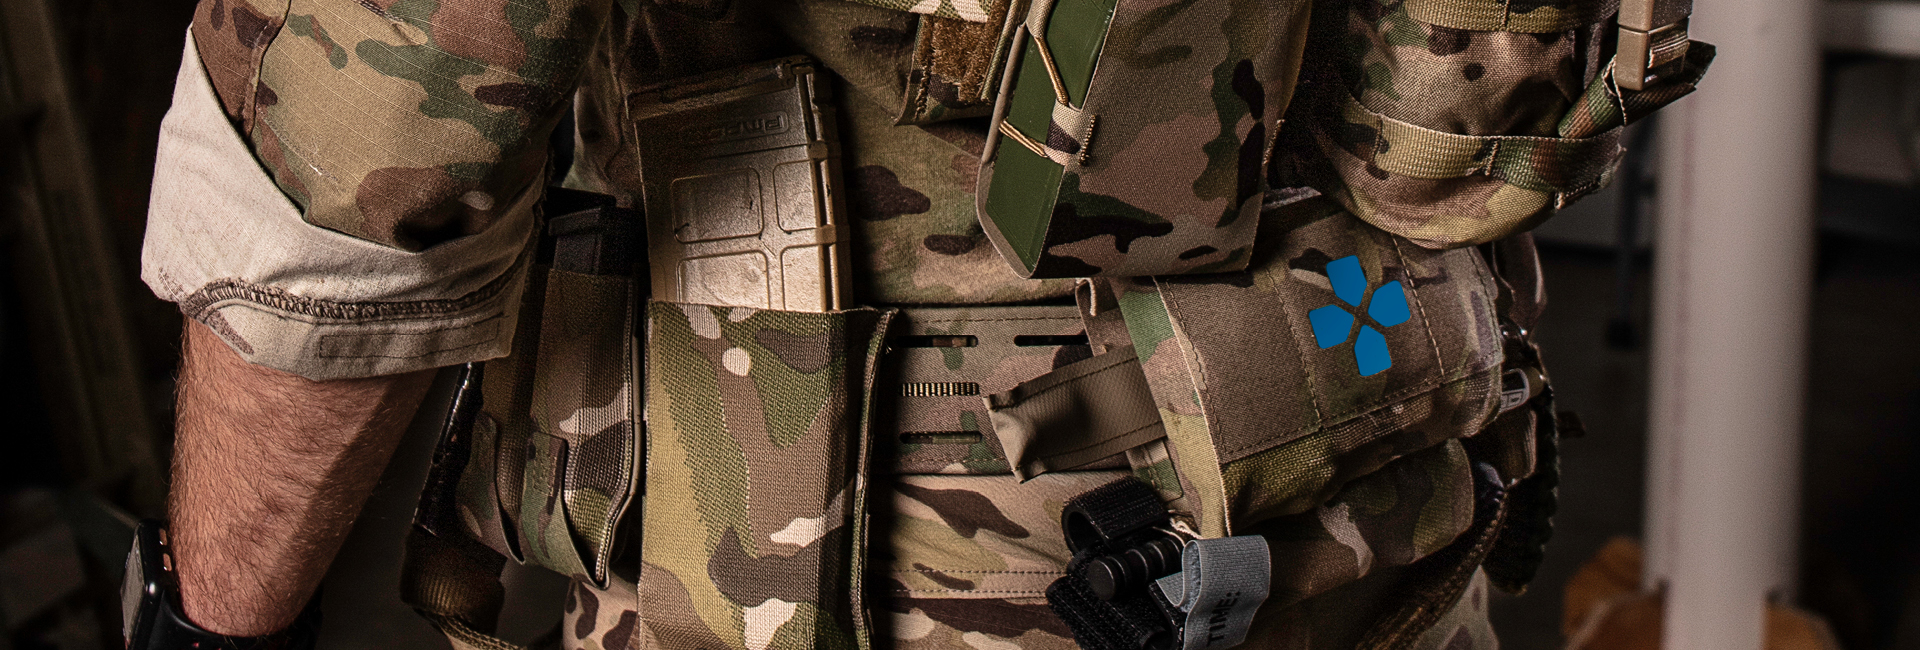 Tactical MOLLE Belt With Medical Supplies